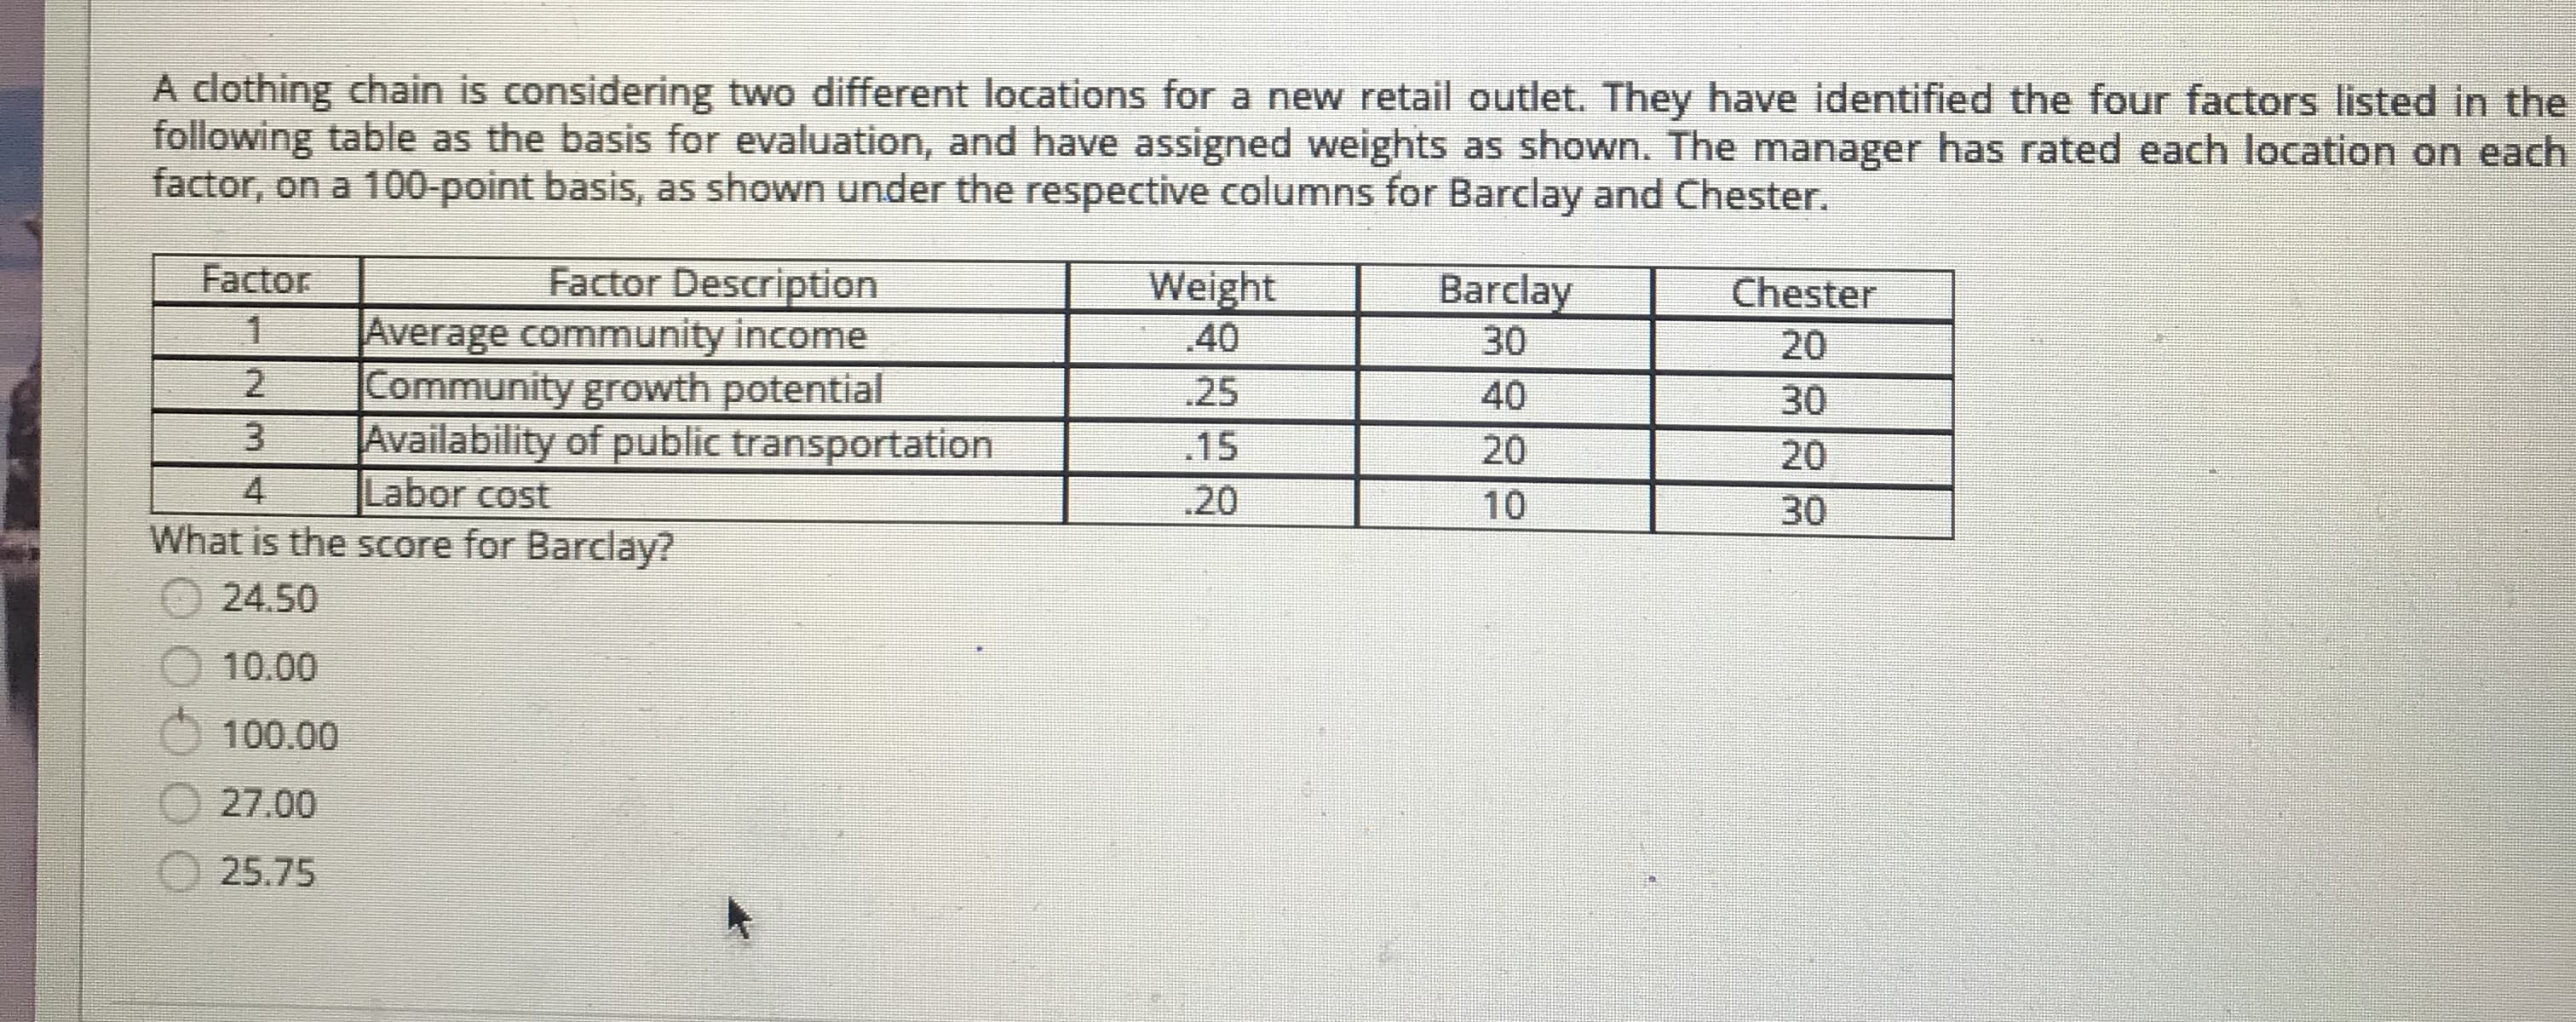 A clothing chain is considering two different locations for a new retail outlet. They have identified the four factors listed in the
following table as the basis for evaluation, and have assigned weights as shown. The manager has rated each location on each
factor, on a 100-point basis, as shown under the respective columns for Barclay and Chester.
Factor Description
Average community income
Community growth potential
Availability of public transportation
Factor
Weight
.40
Barclay
Chester
30
20
.25
40
30
.15
20
20
Labor cost
What is the score for Barclay?
4
.20
10
30
24.50
10.00
100.00
27.00
25.75
